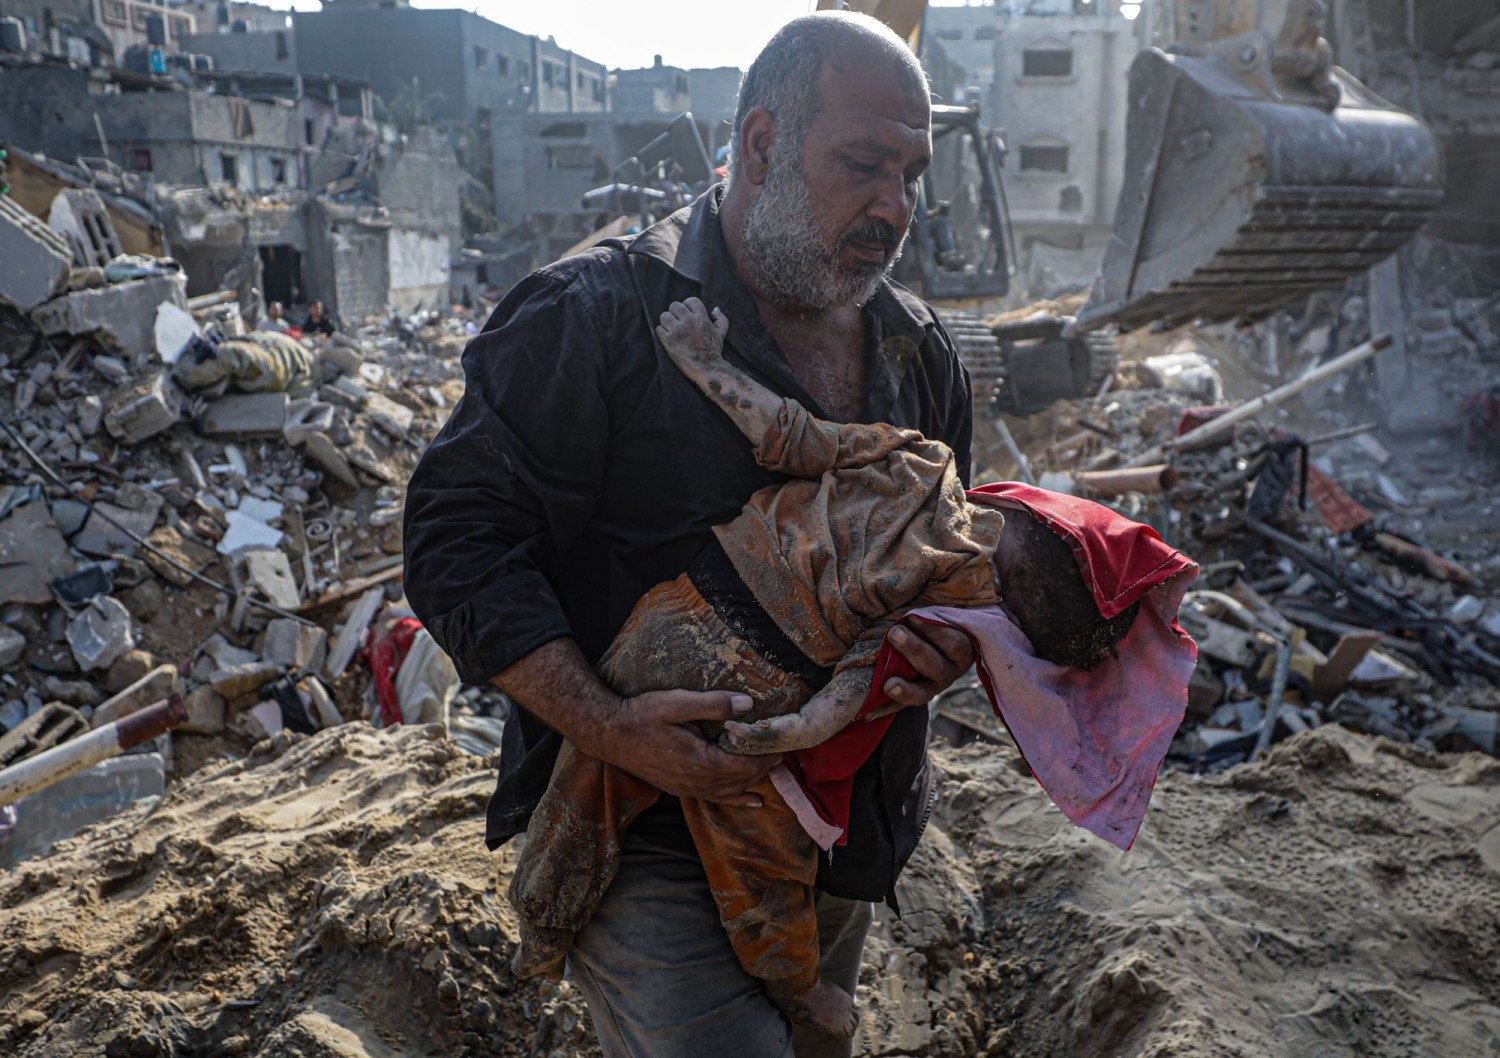 A Palestinian man carries the body of a baby recovered from the rubble of the Jabalia refugee camp one day after an Israeli airstrike hit the area. MOHAMMED SABER/EPA/SHUTTERSTOCK